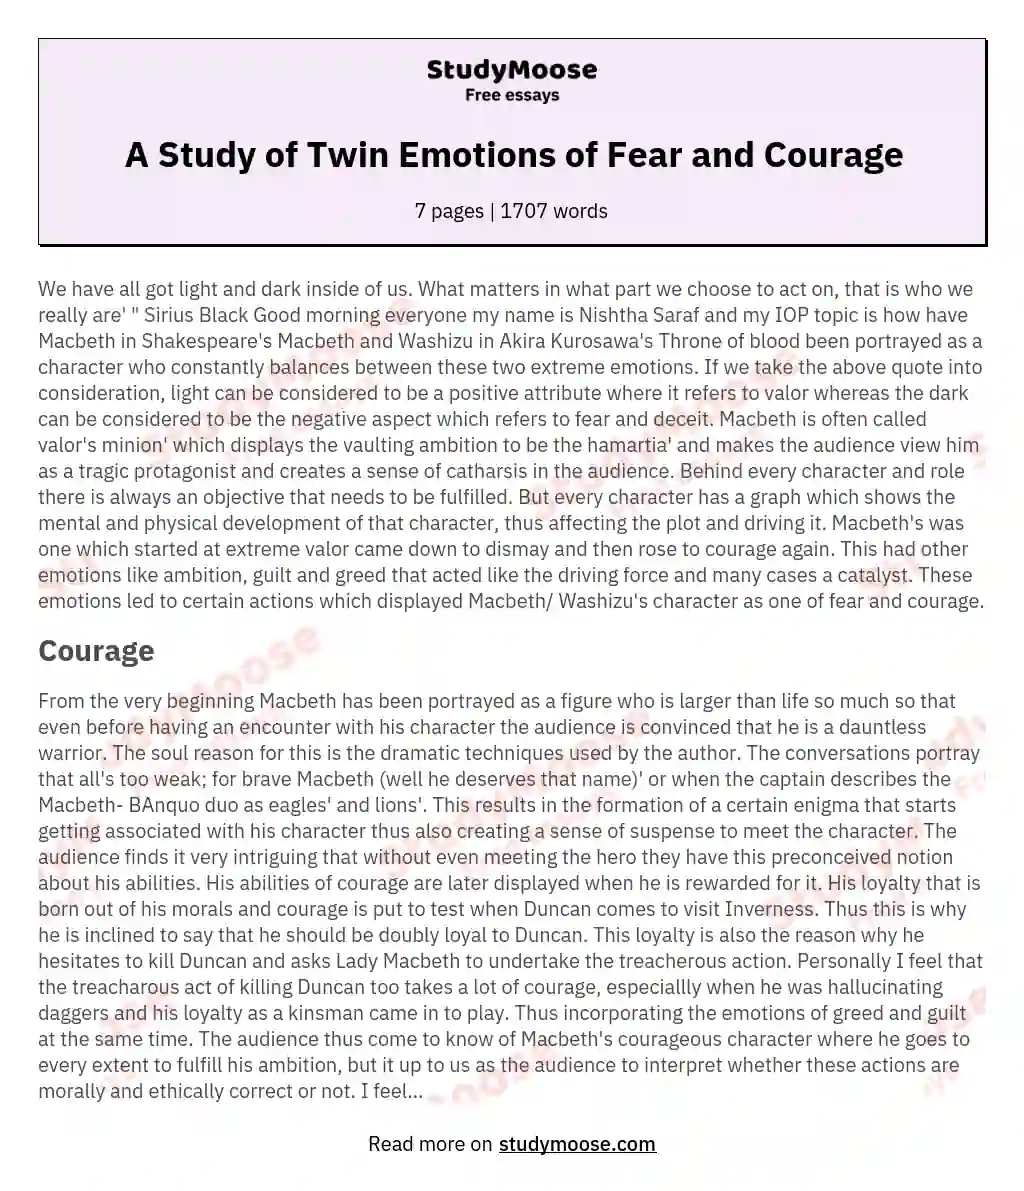 A Study of Twin Emotions of Fear and Courage